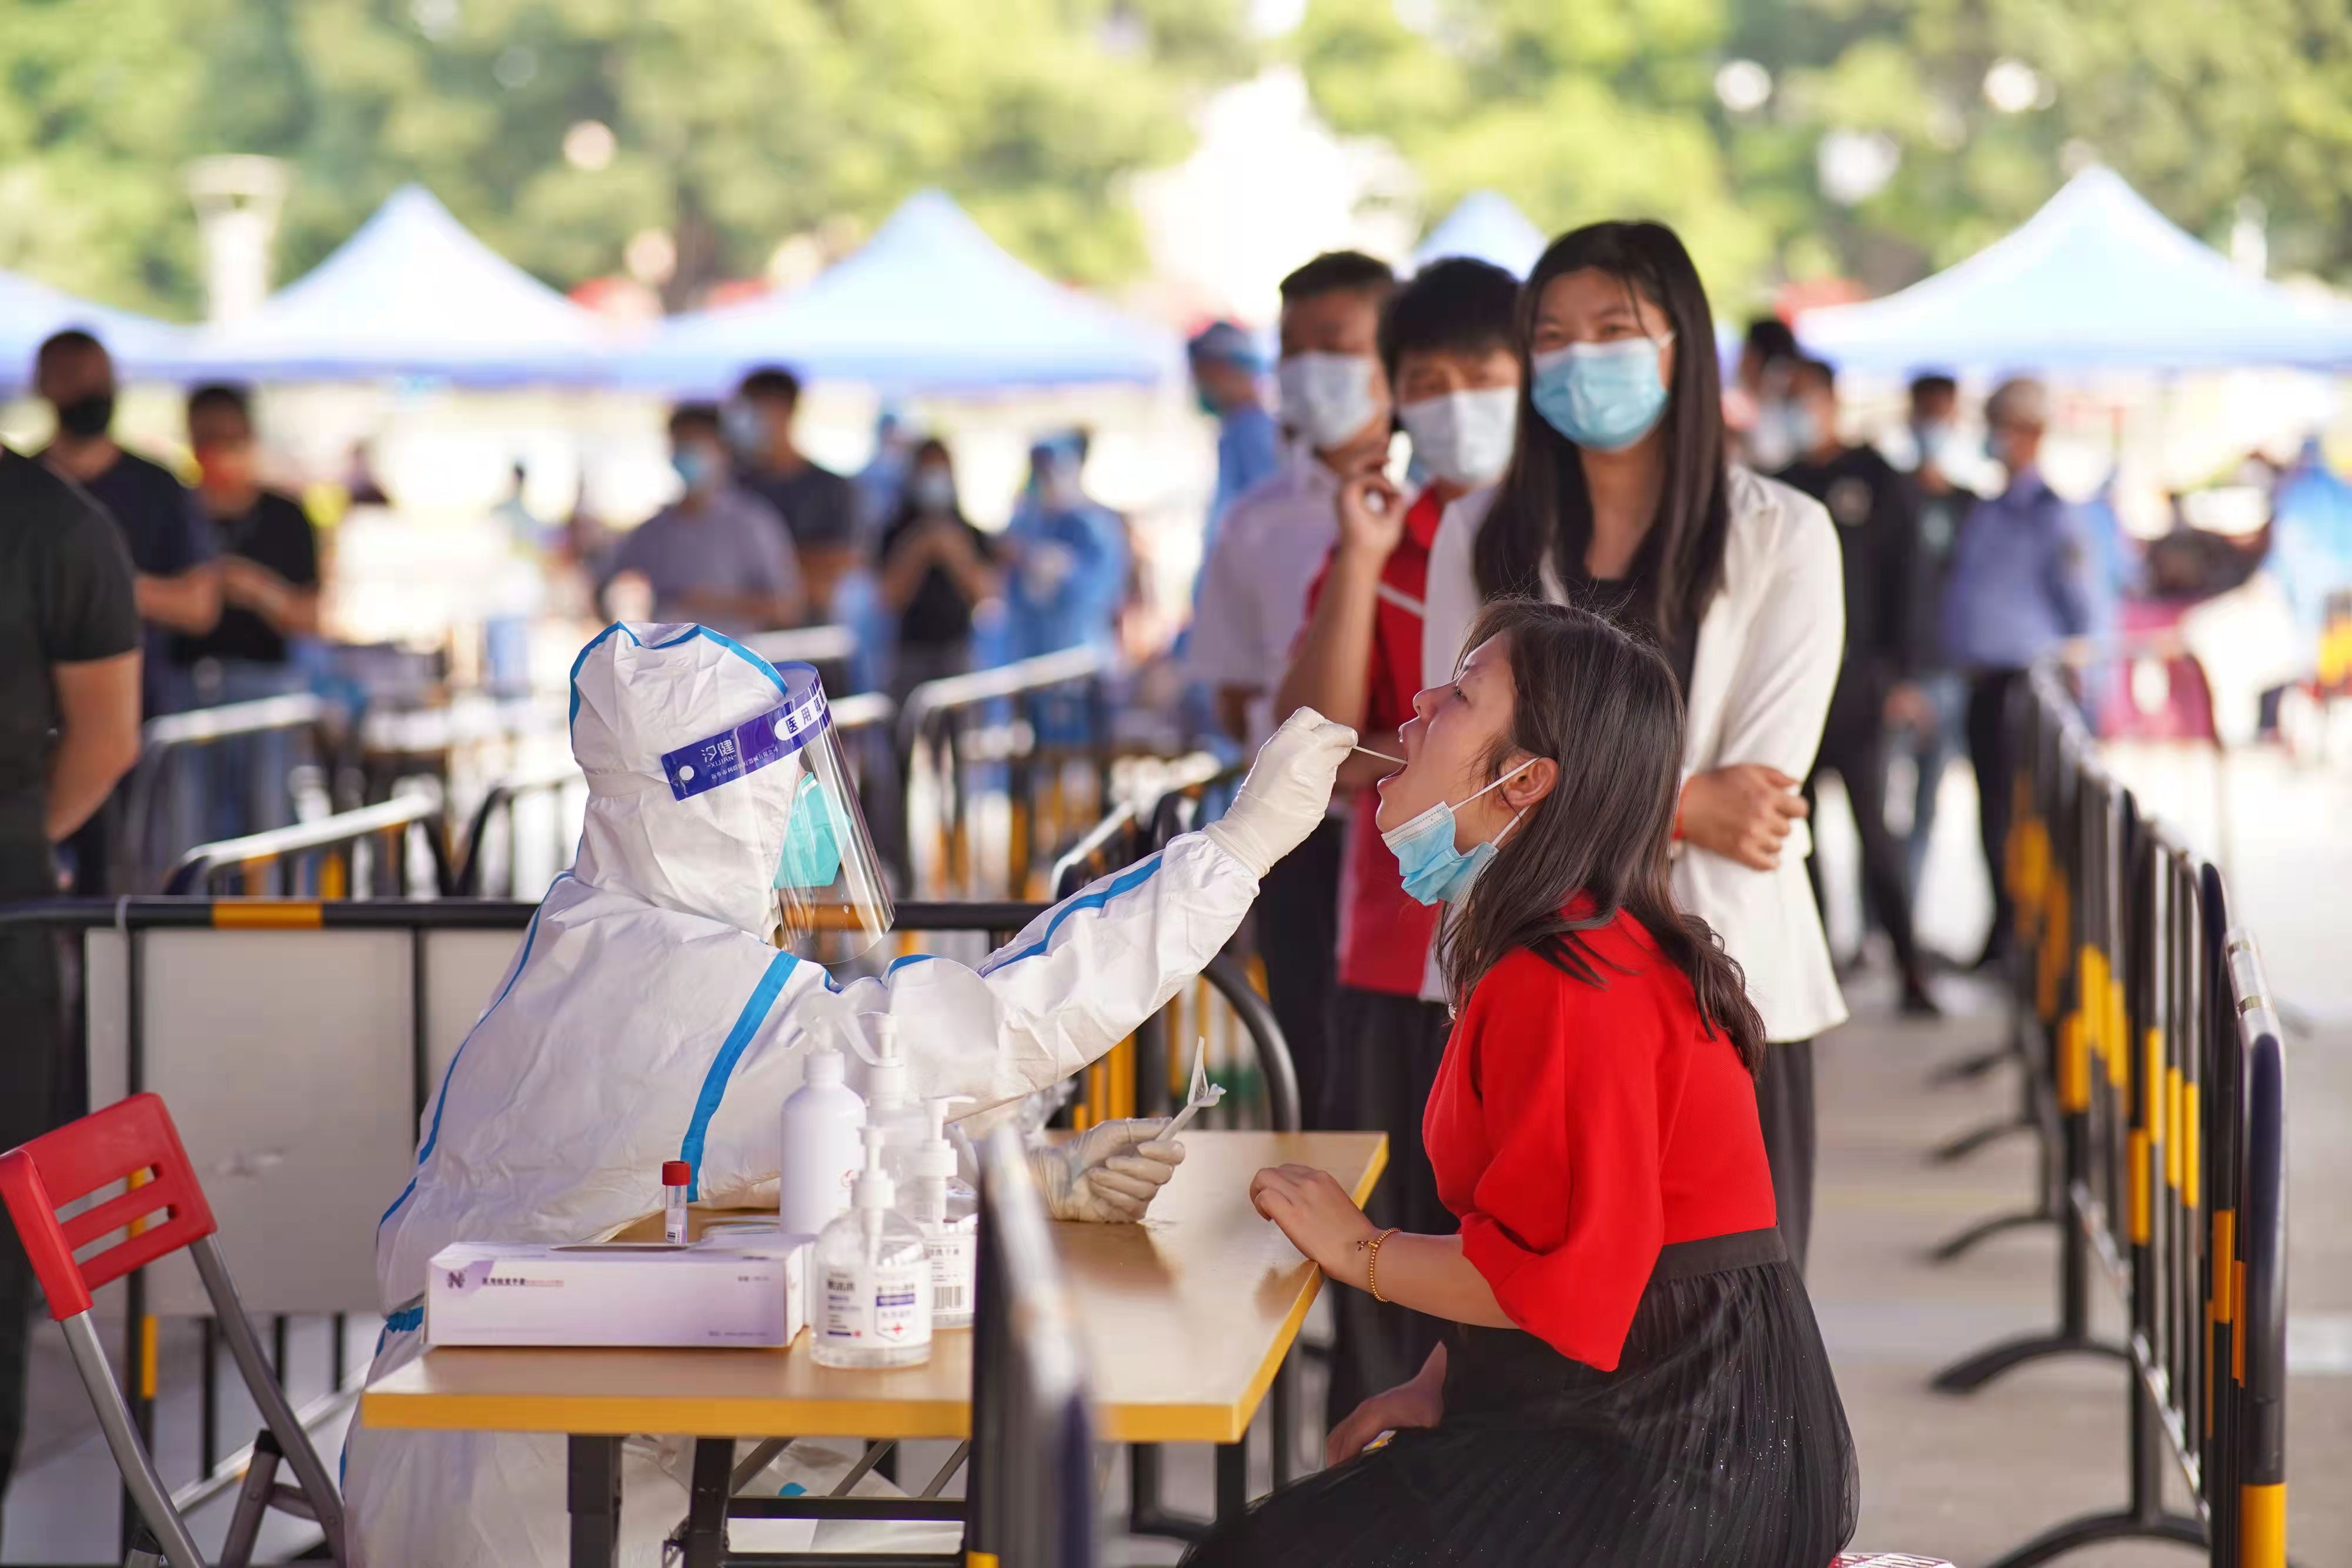 Foshan lowered nucleic acid testing price for residents